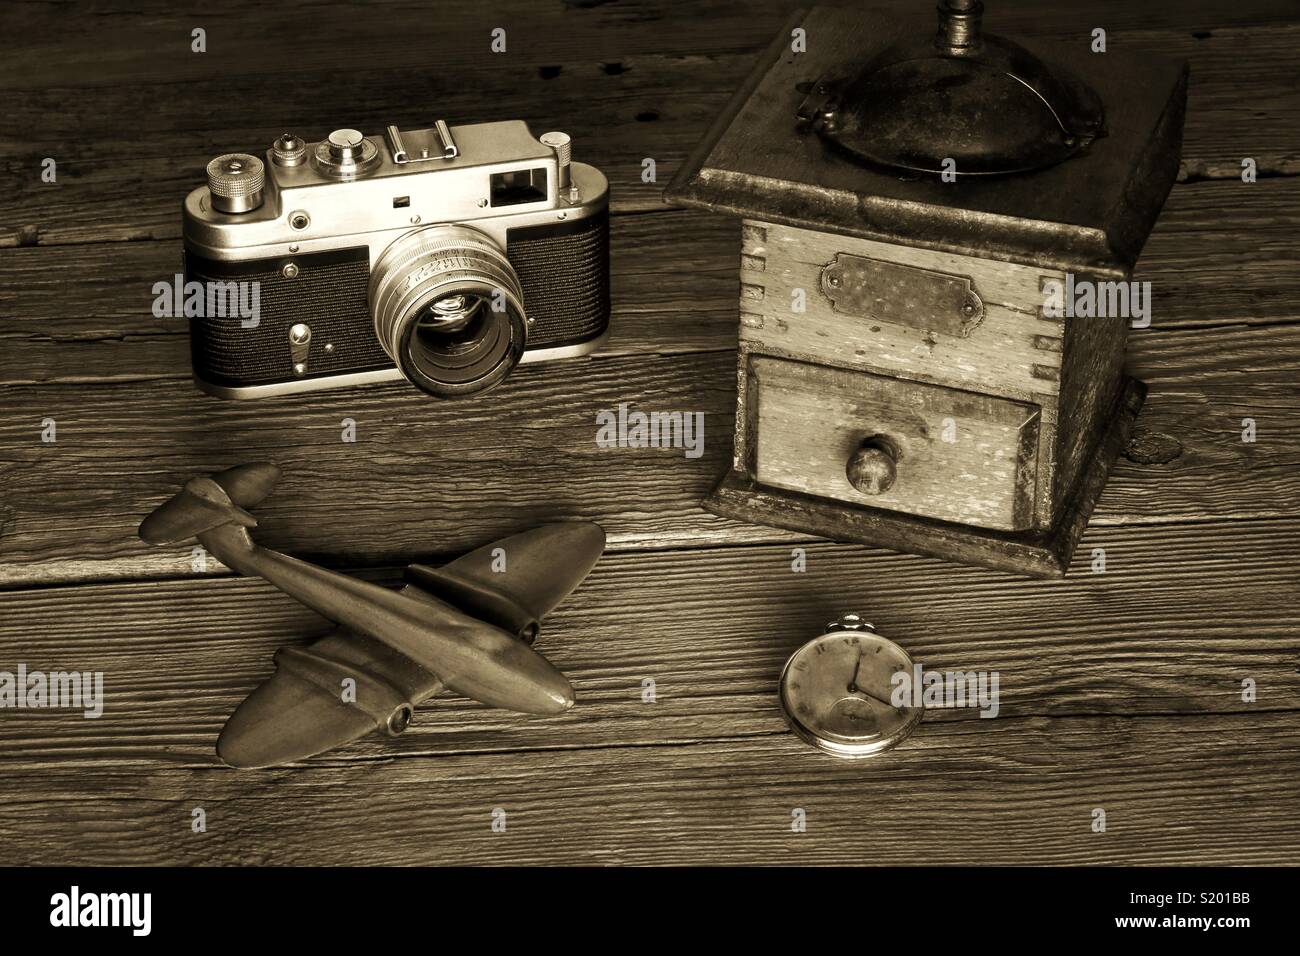 Vintage romantic mood - camera coffee grinder toy plane and a watch Stock Photo